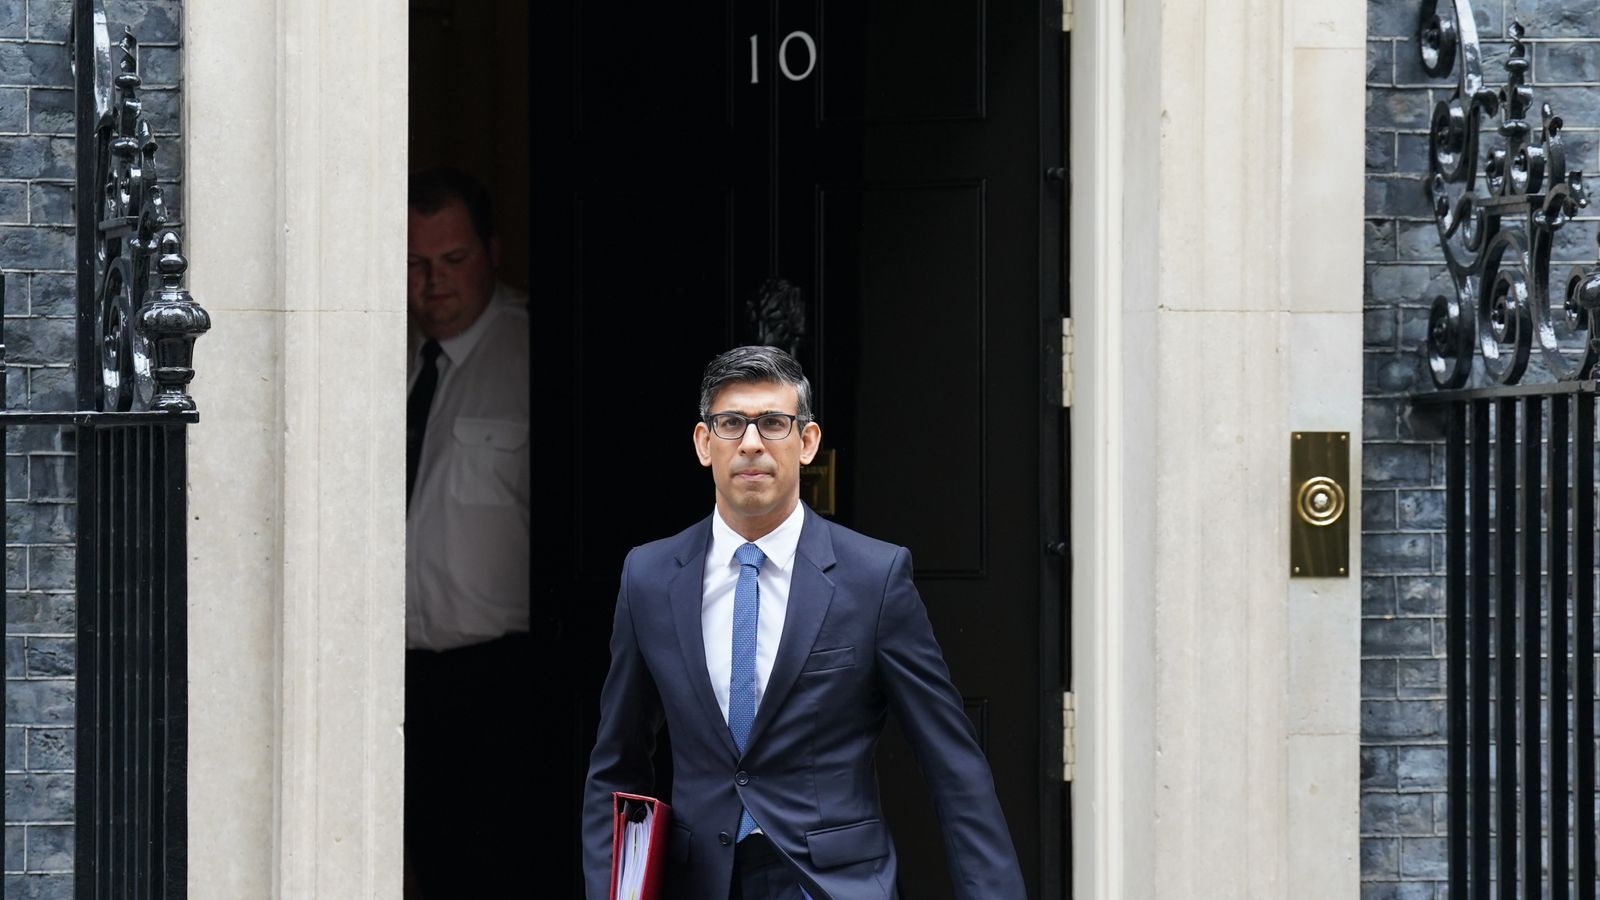 Rishi Sunak's situation is salvageable - but he's currently on course to lose No 10 at next election